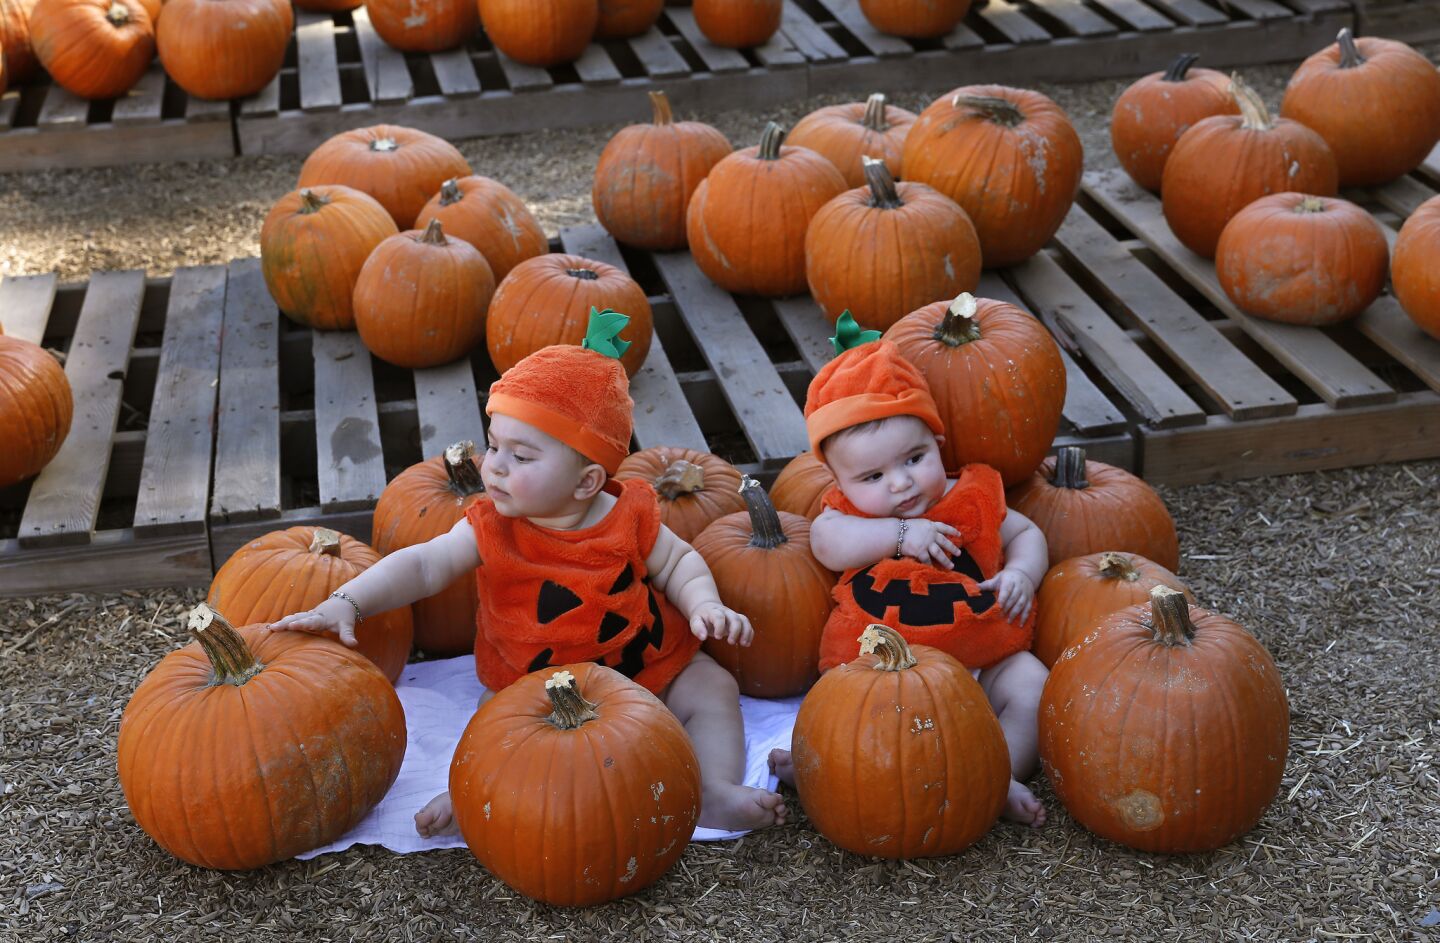 George Adjikian, 8 months, and his cousin Abraham Daglian, 4 months, prepare to have their photograph taken by their mothers during a visit to the pumpkin patch at Tapia Brothers Farm in Encino.